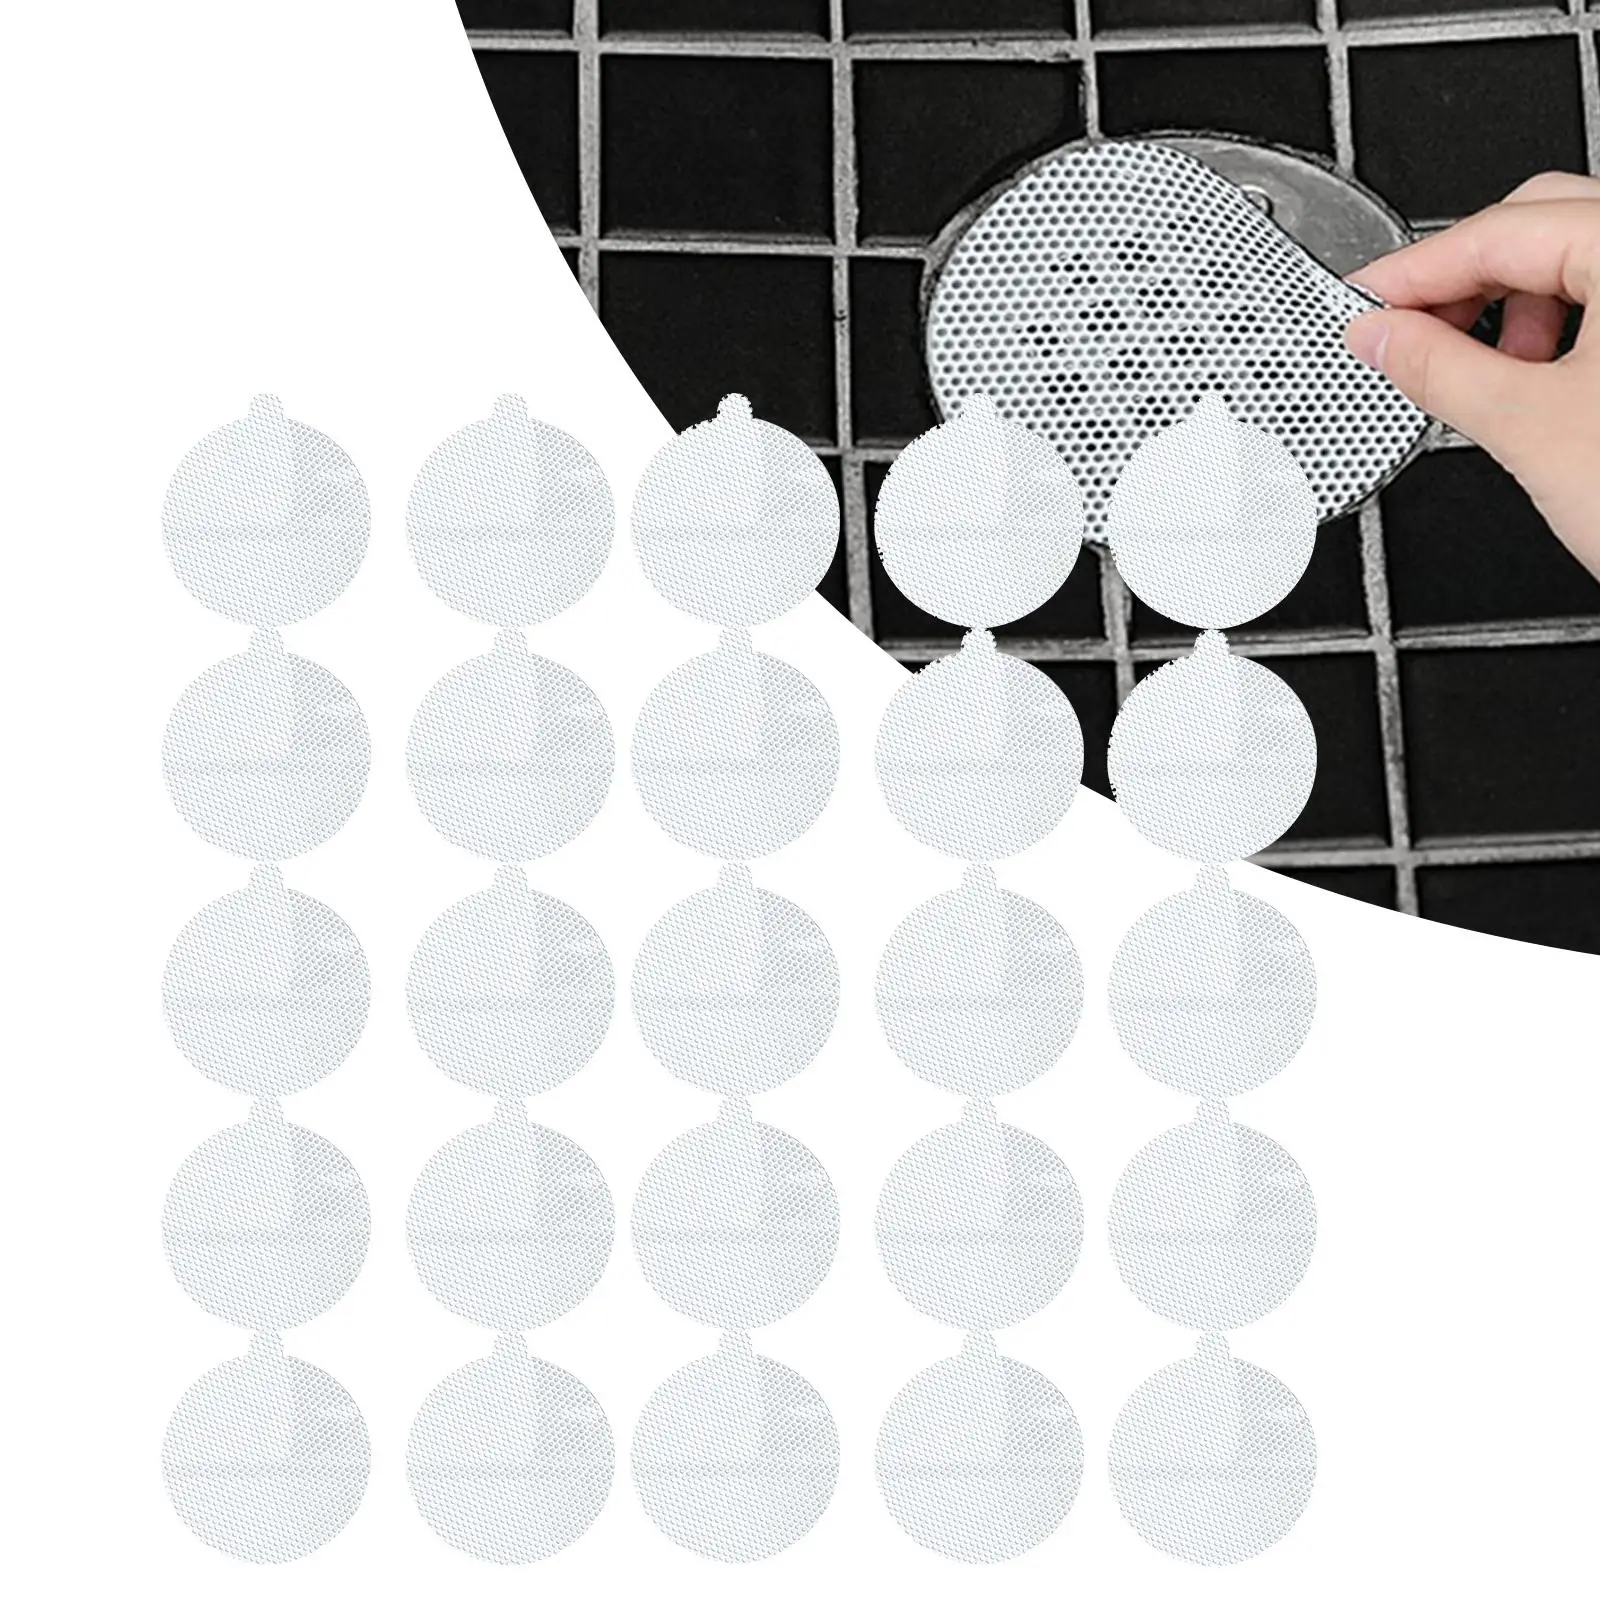 25 Pieces Disposable Shower Drain Catcher Cover Collector for Laundry